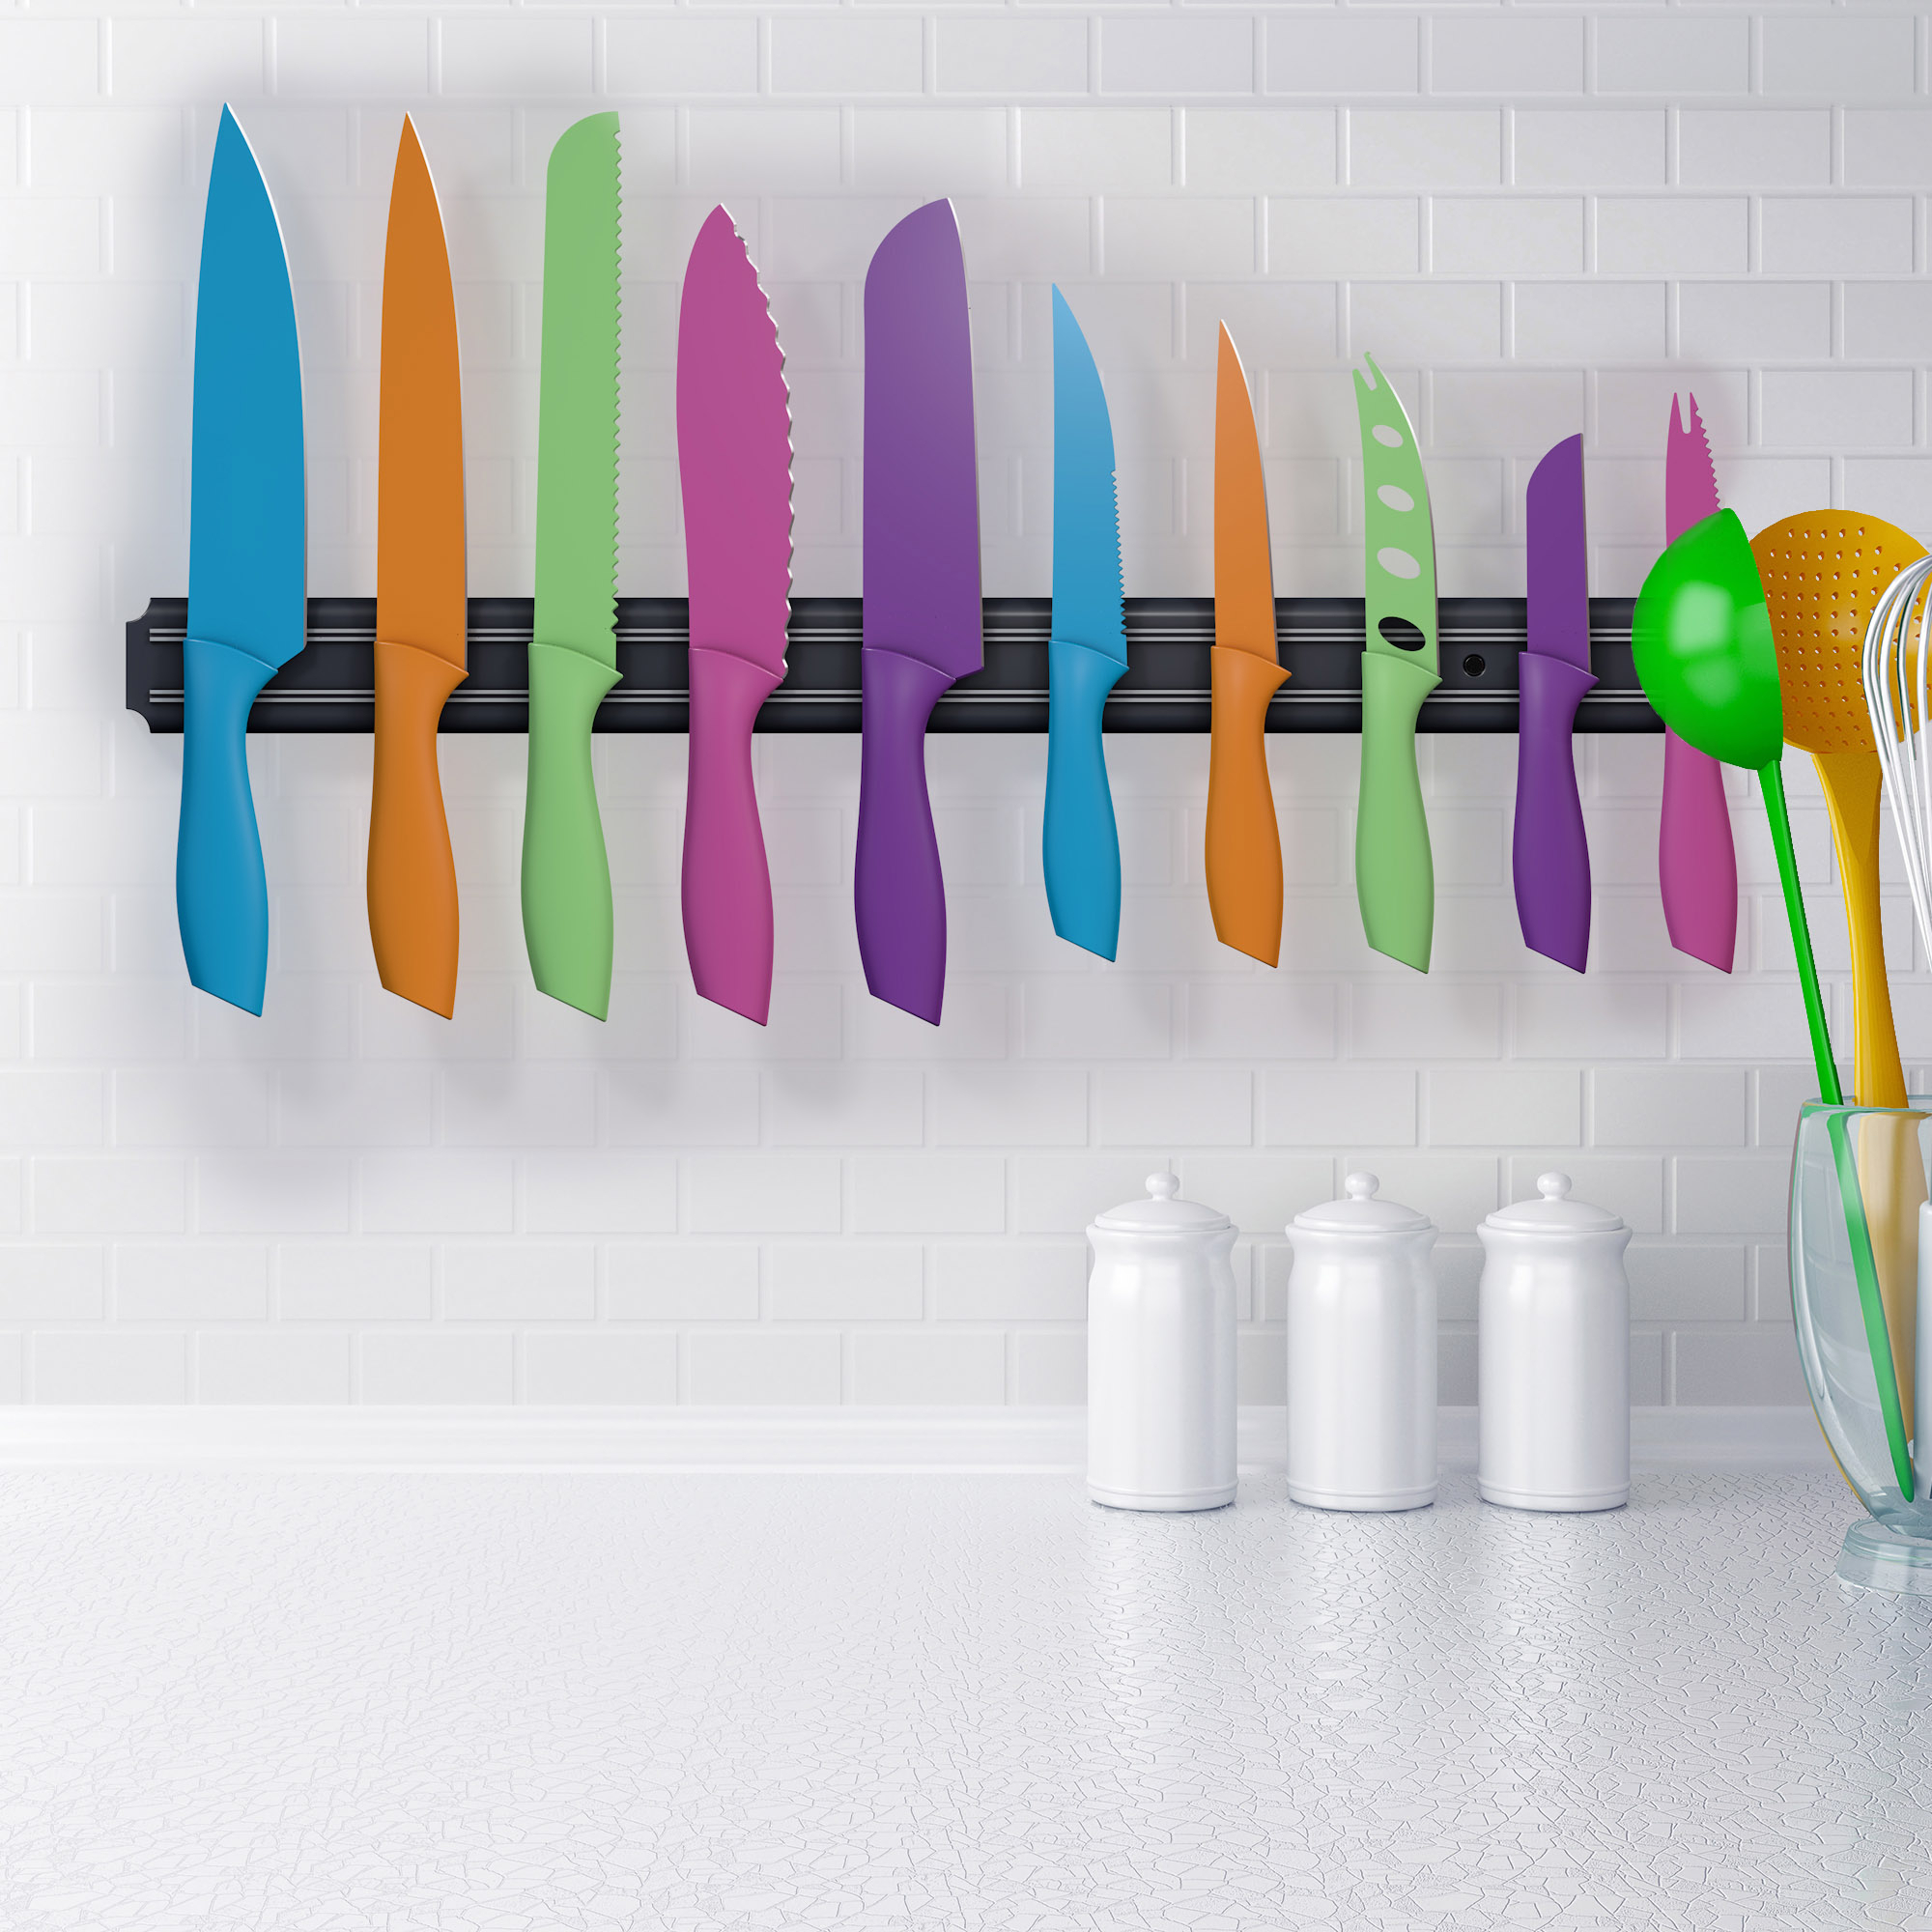 Classic Cuisine 10 Piece Multi-Colored Knife Set With Magnetic Bar